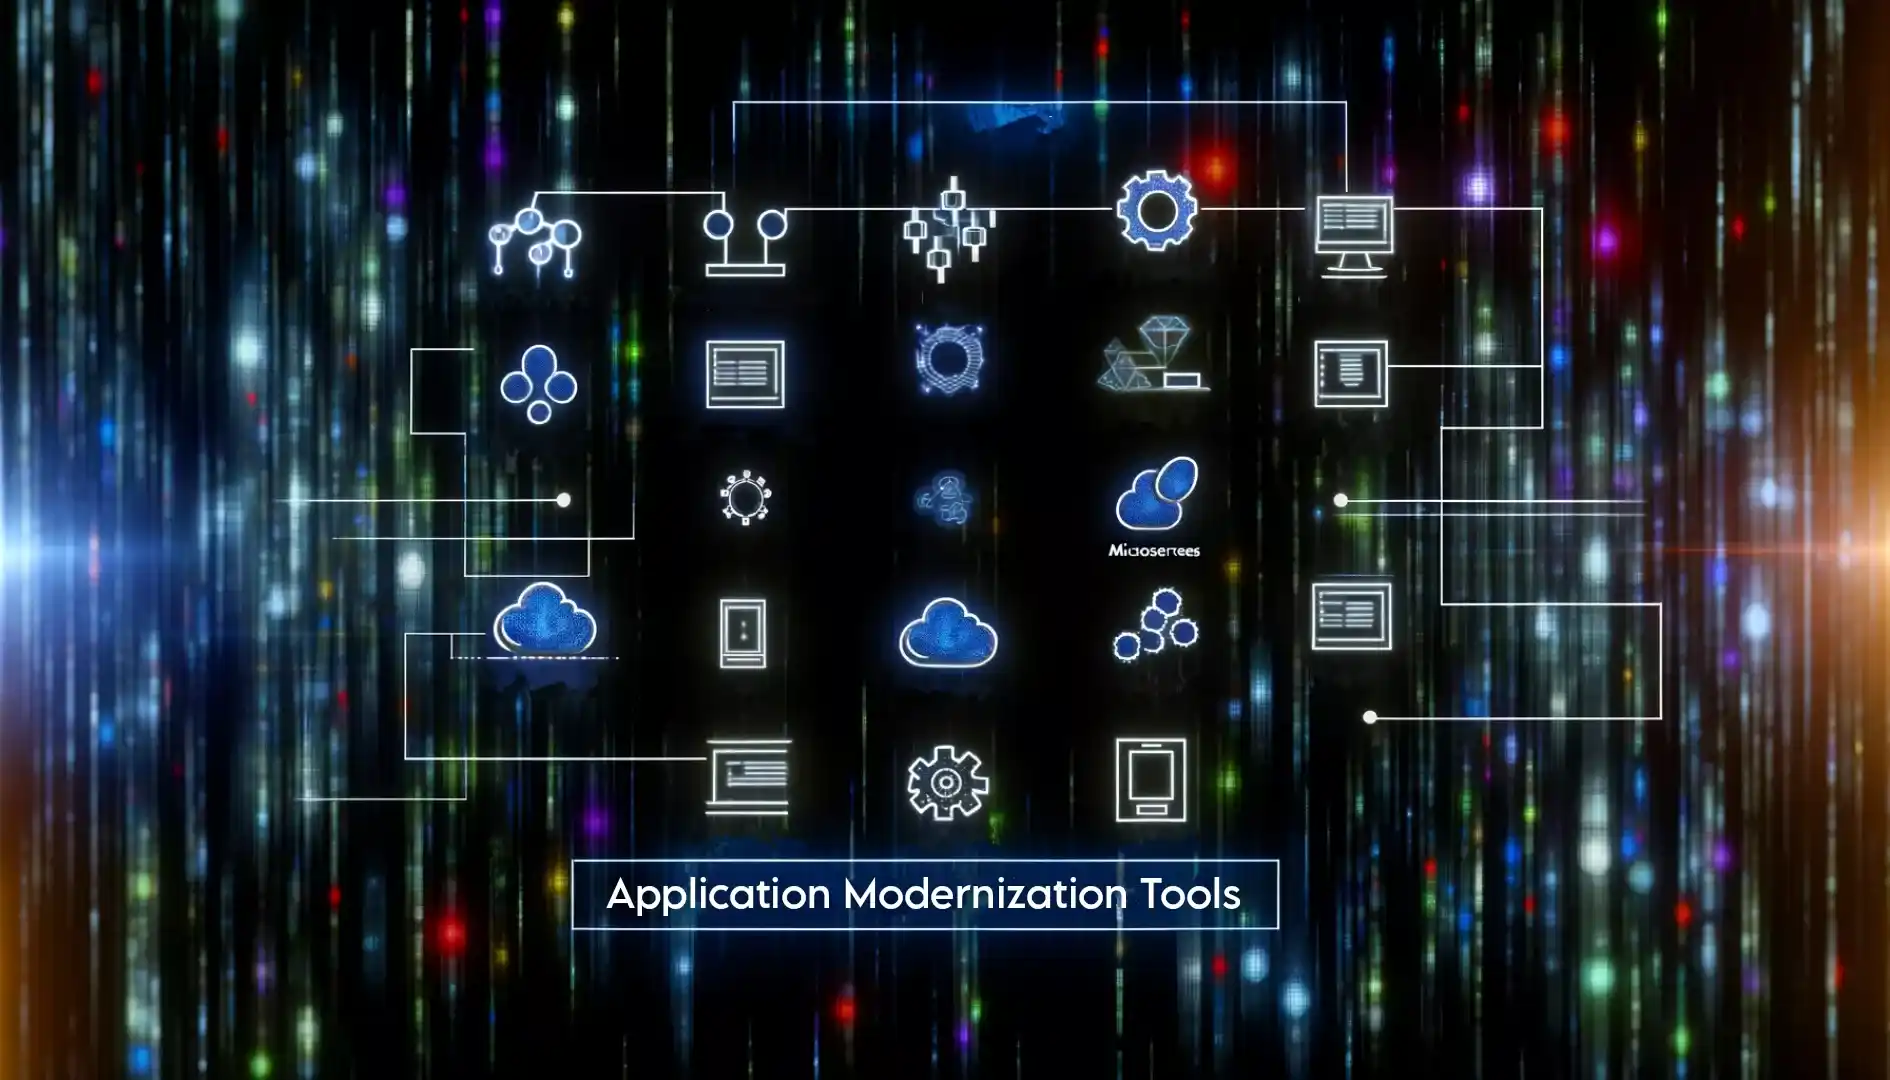 Tools used for App management